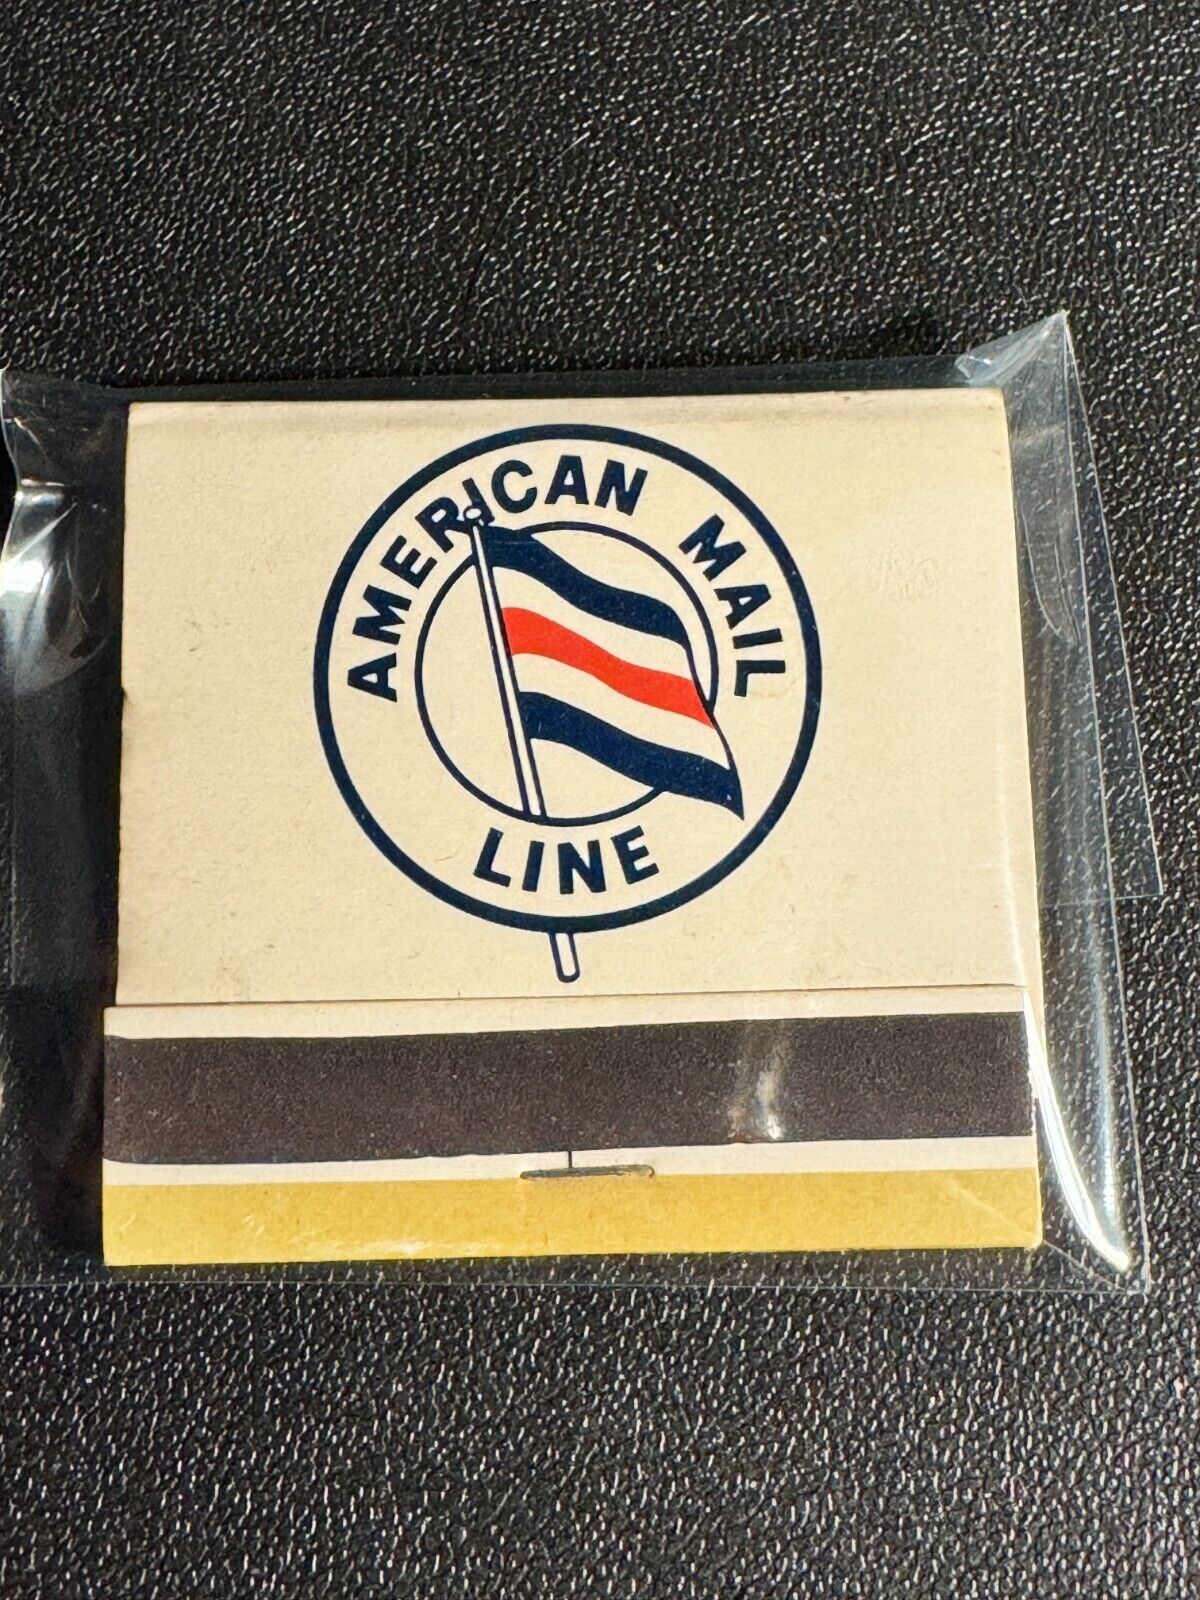 MATCHBOOK - AMERICAN MAIL LINE - PACIFIC TRADERS - SHORT ROUTE - UNSTRUCK